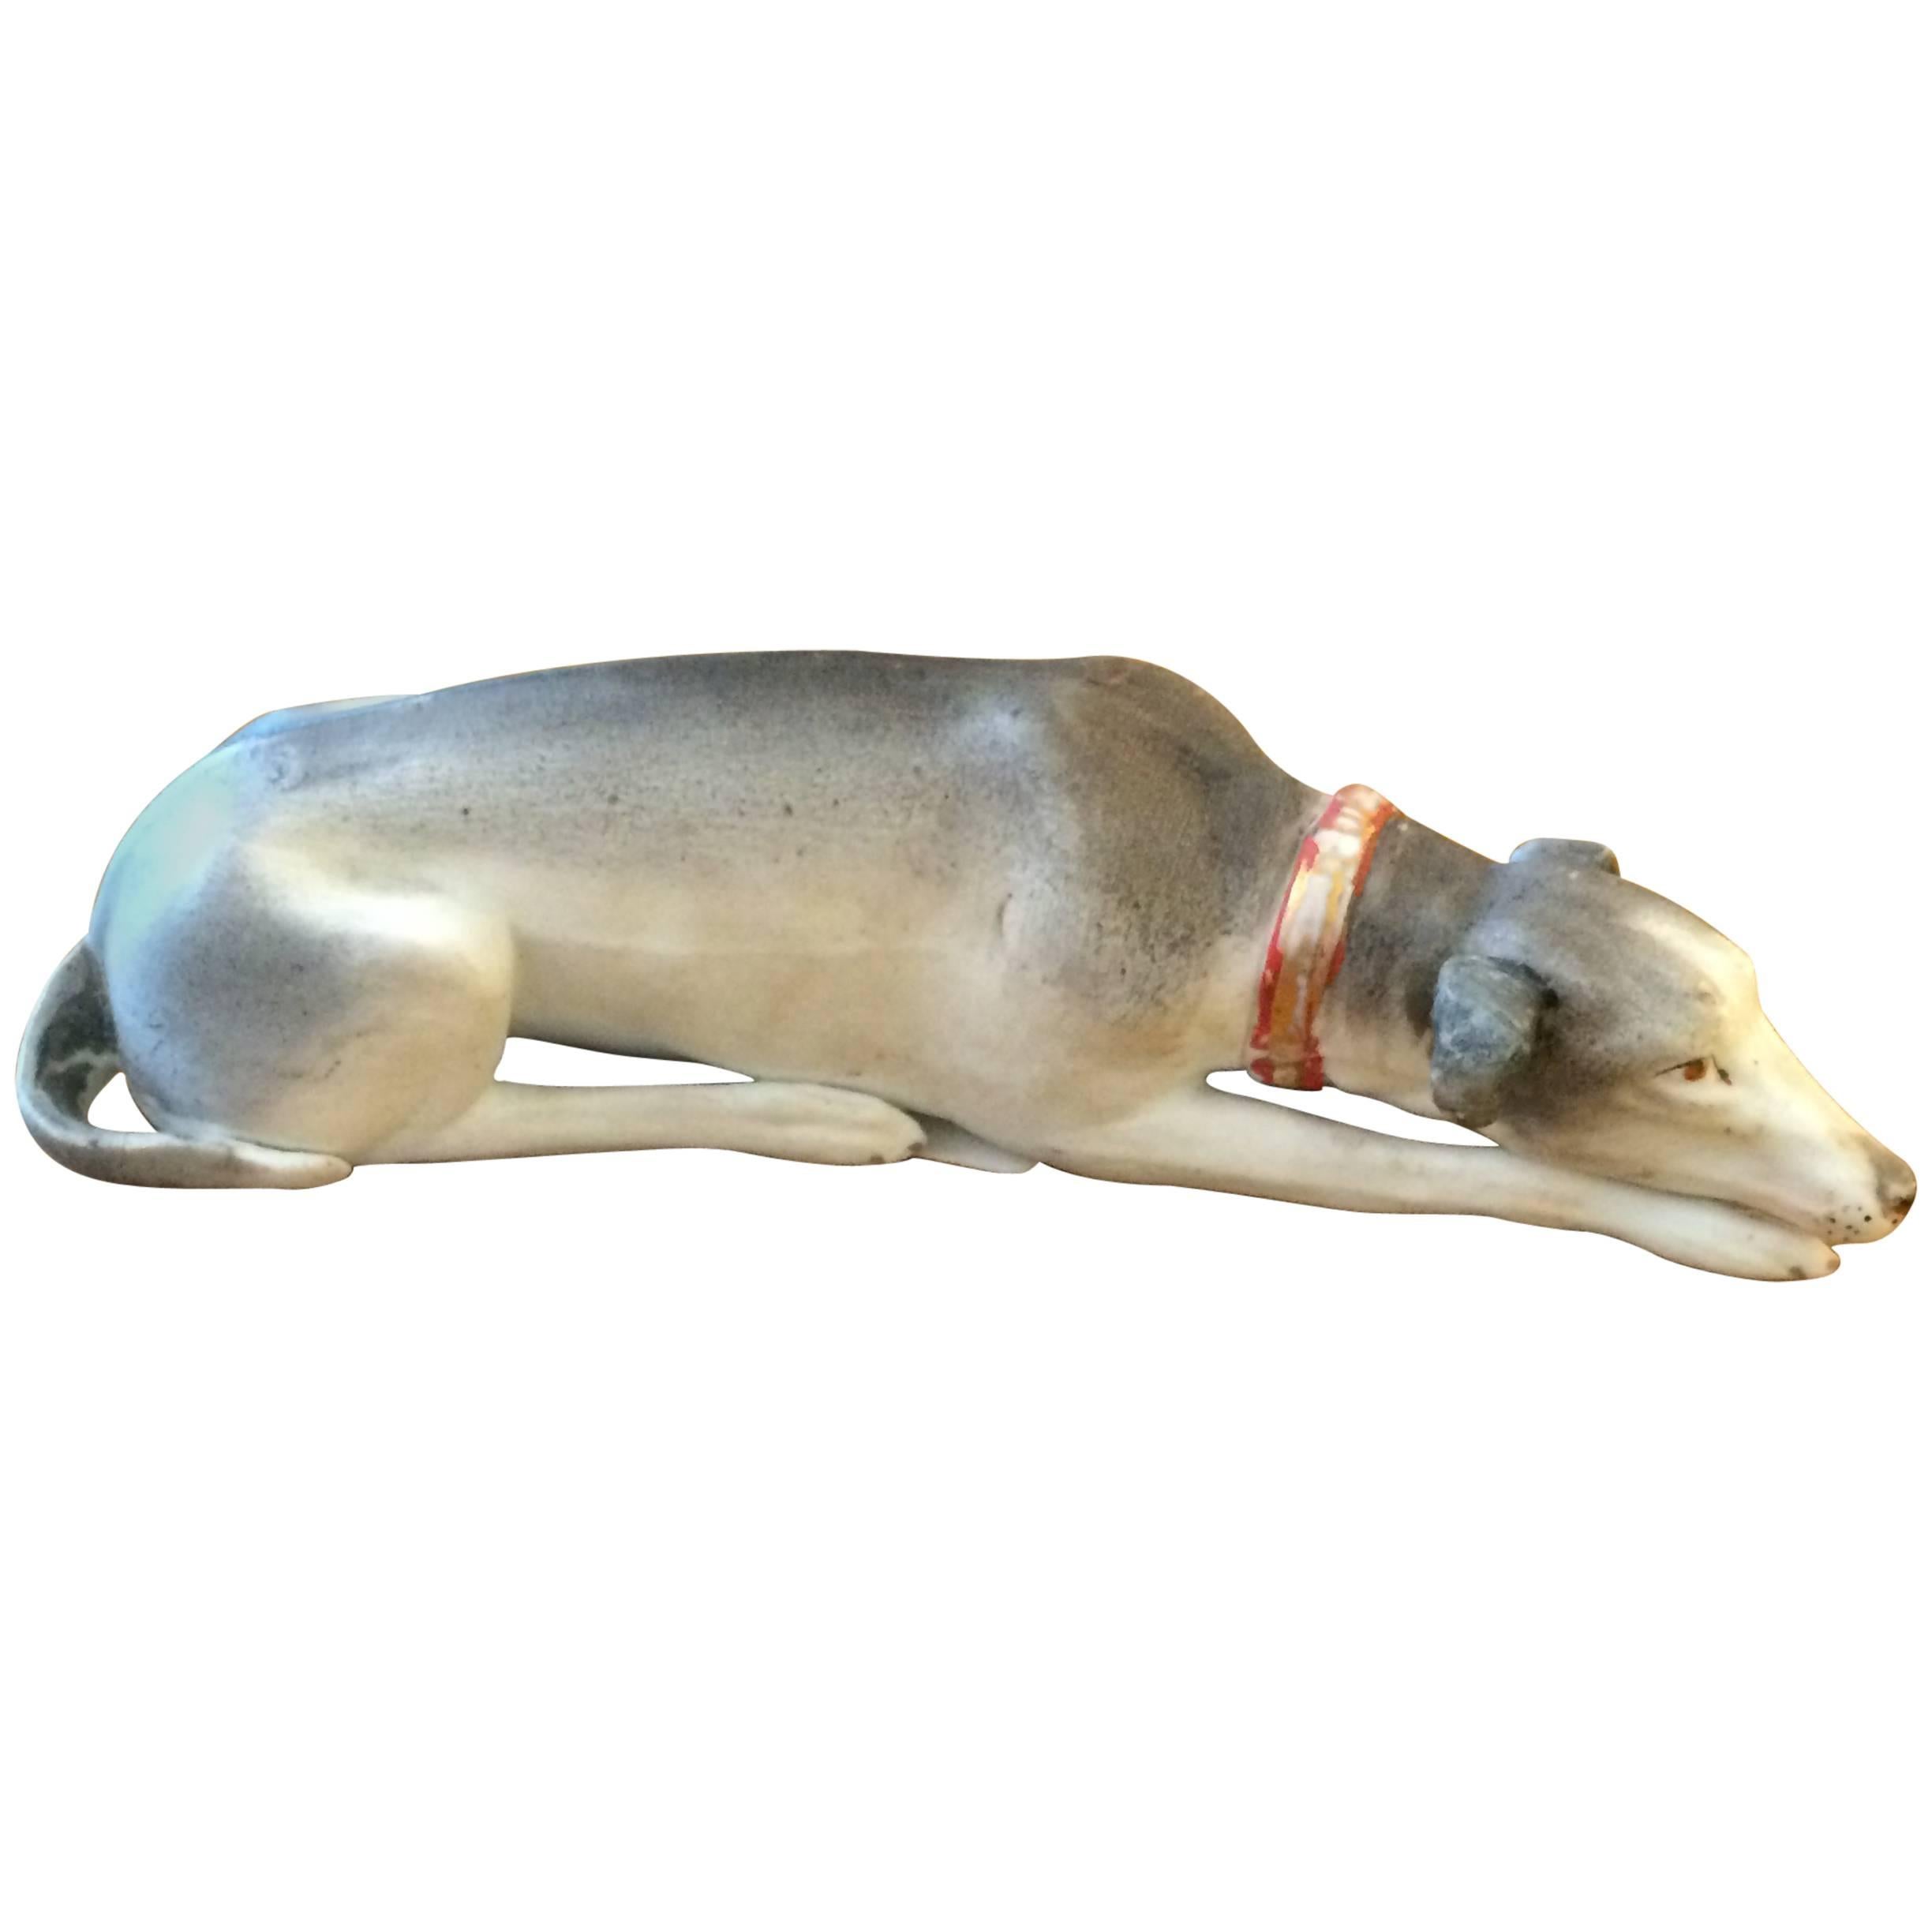 Wonderful pair of vintage Staffordshire having reclining hunting dogs and rabbits, beautiful gold leaf decoration on the edges.

Lovely small elegant sculpture of a grey and white reclining greyhound dog.